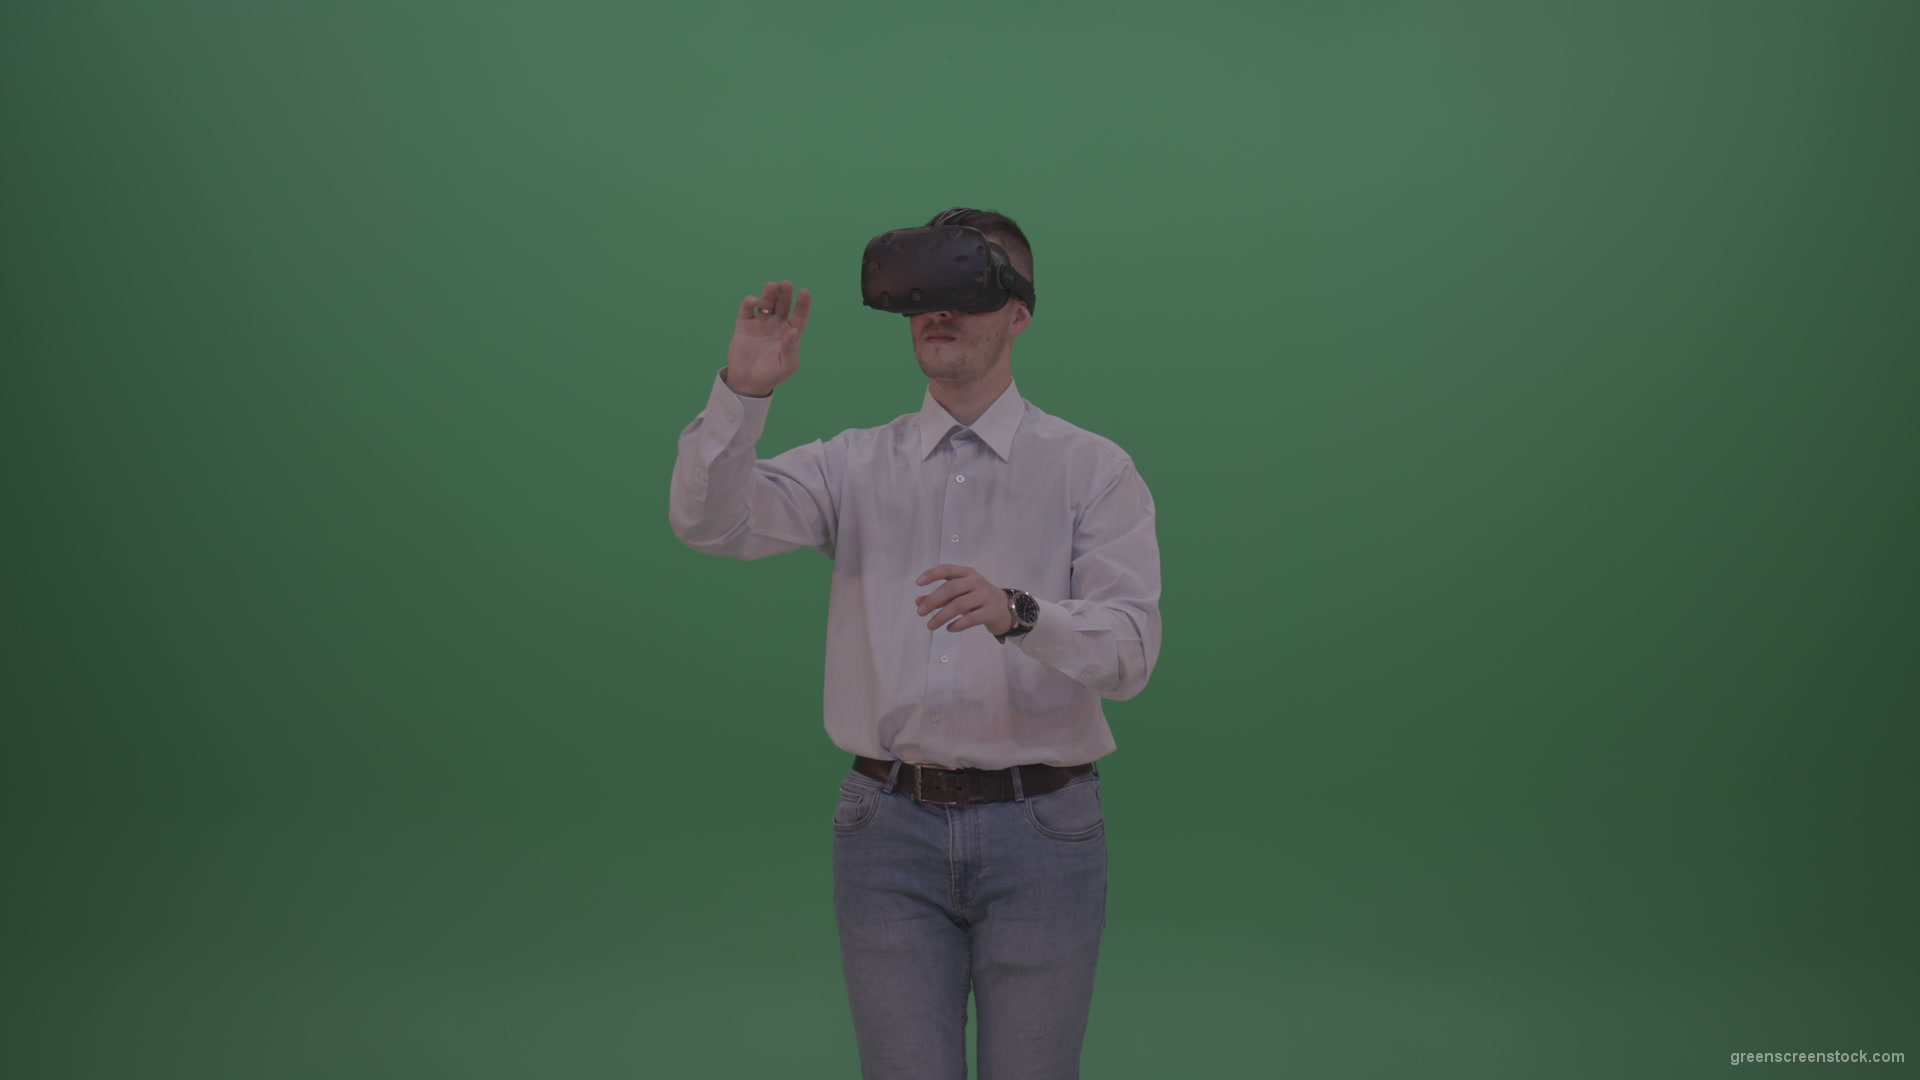 Young_Handsome_Man_With_Black_Hair_Wearing_White_Shirt_Using_Virtual_Glasses_Clicking_Touch_Pad_On_Green_Screen_Background_Wall_004 Green Screen Stock